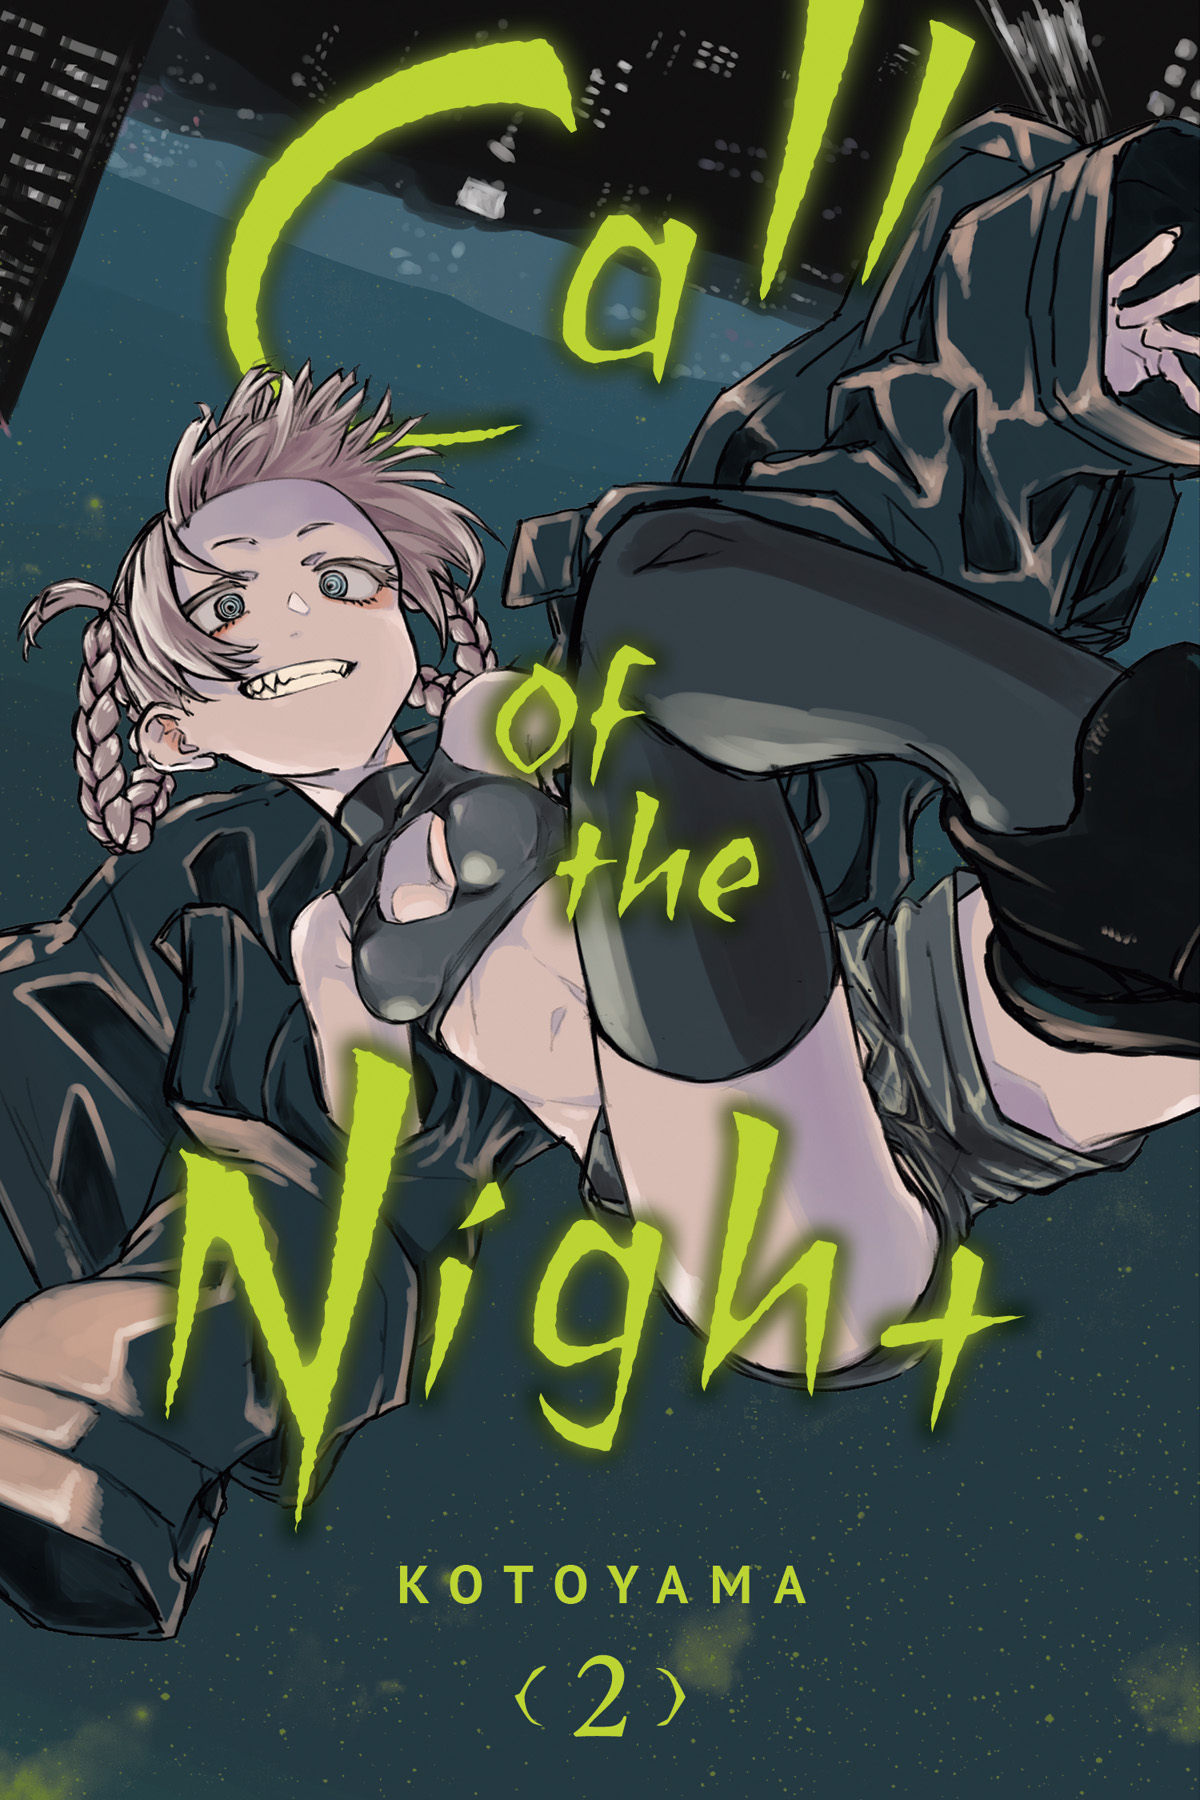 Call of the Night Episodes #01 – 02 Anime Review